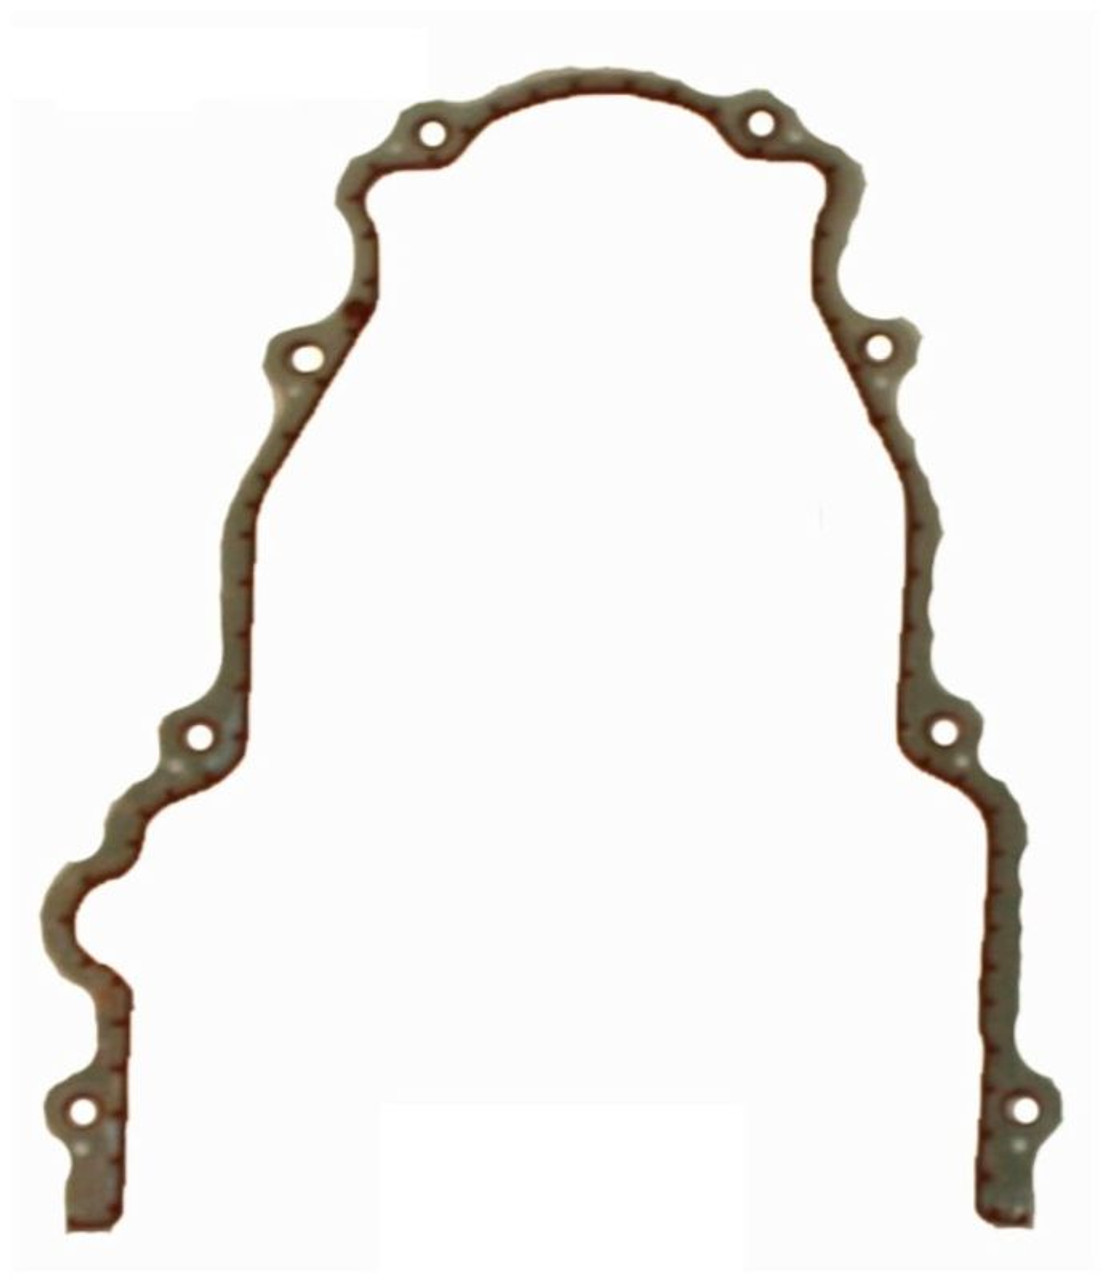 2013 Chevrolet Camaro 6.2L Engine Timing Cover Gasket TCG293-A -817